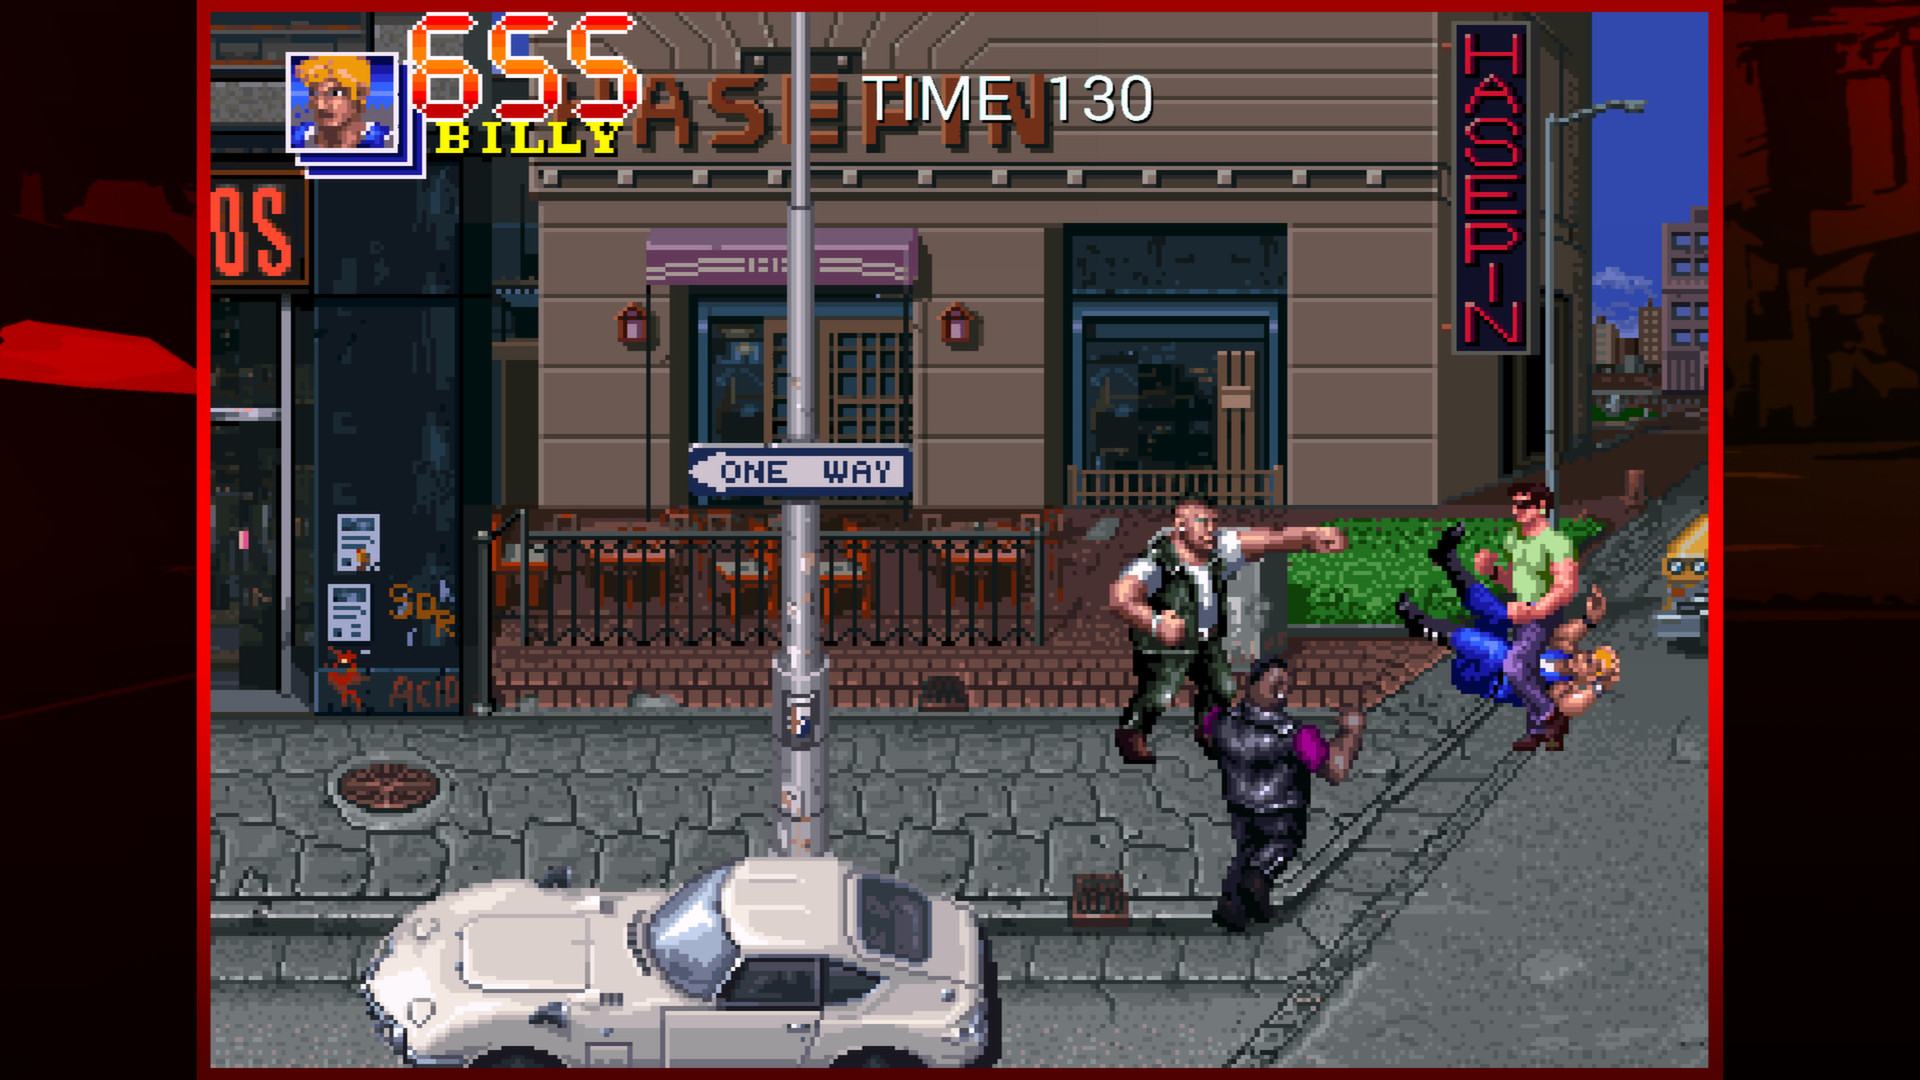 double dragon 3 play online